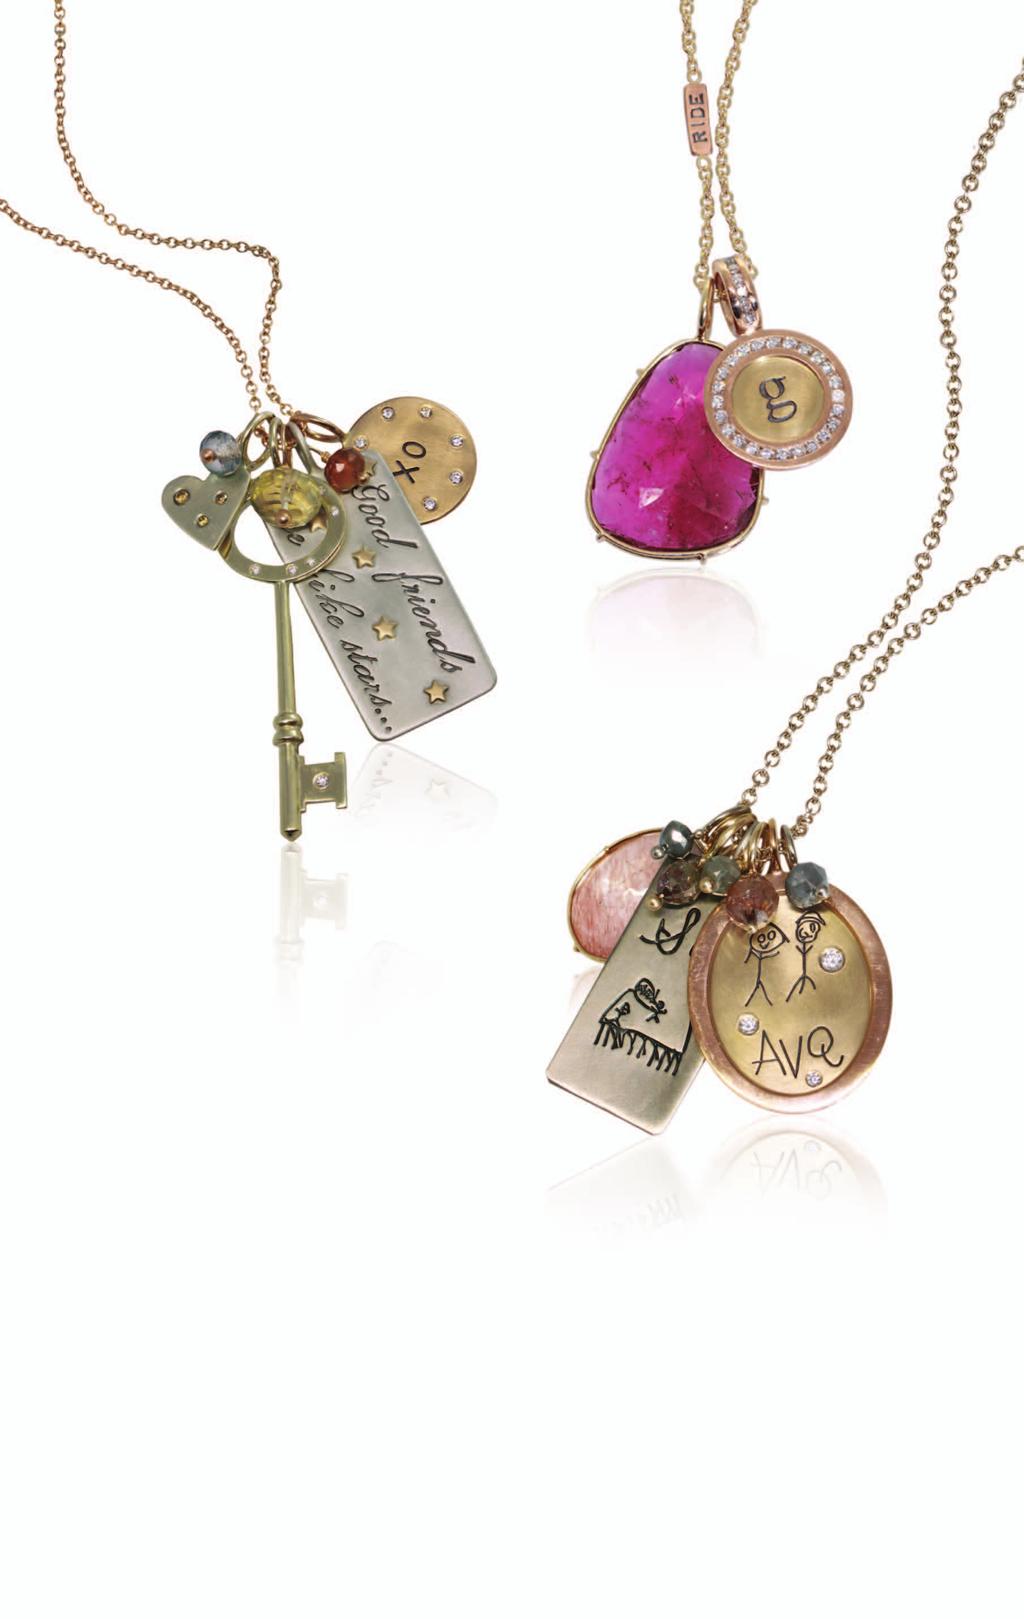 A All charms are available in combinations of recycled sterling silver, 14kt yellow, rose, white and green gold.